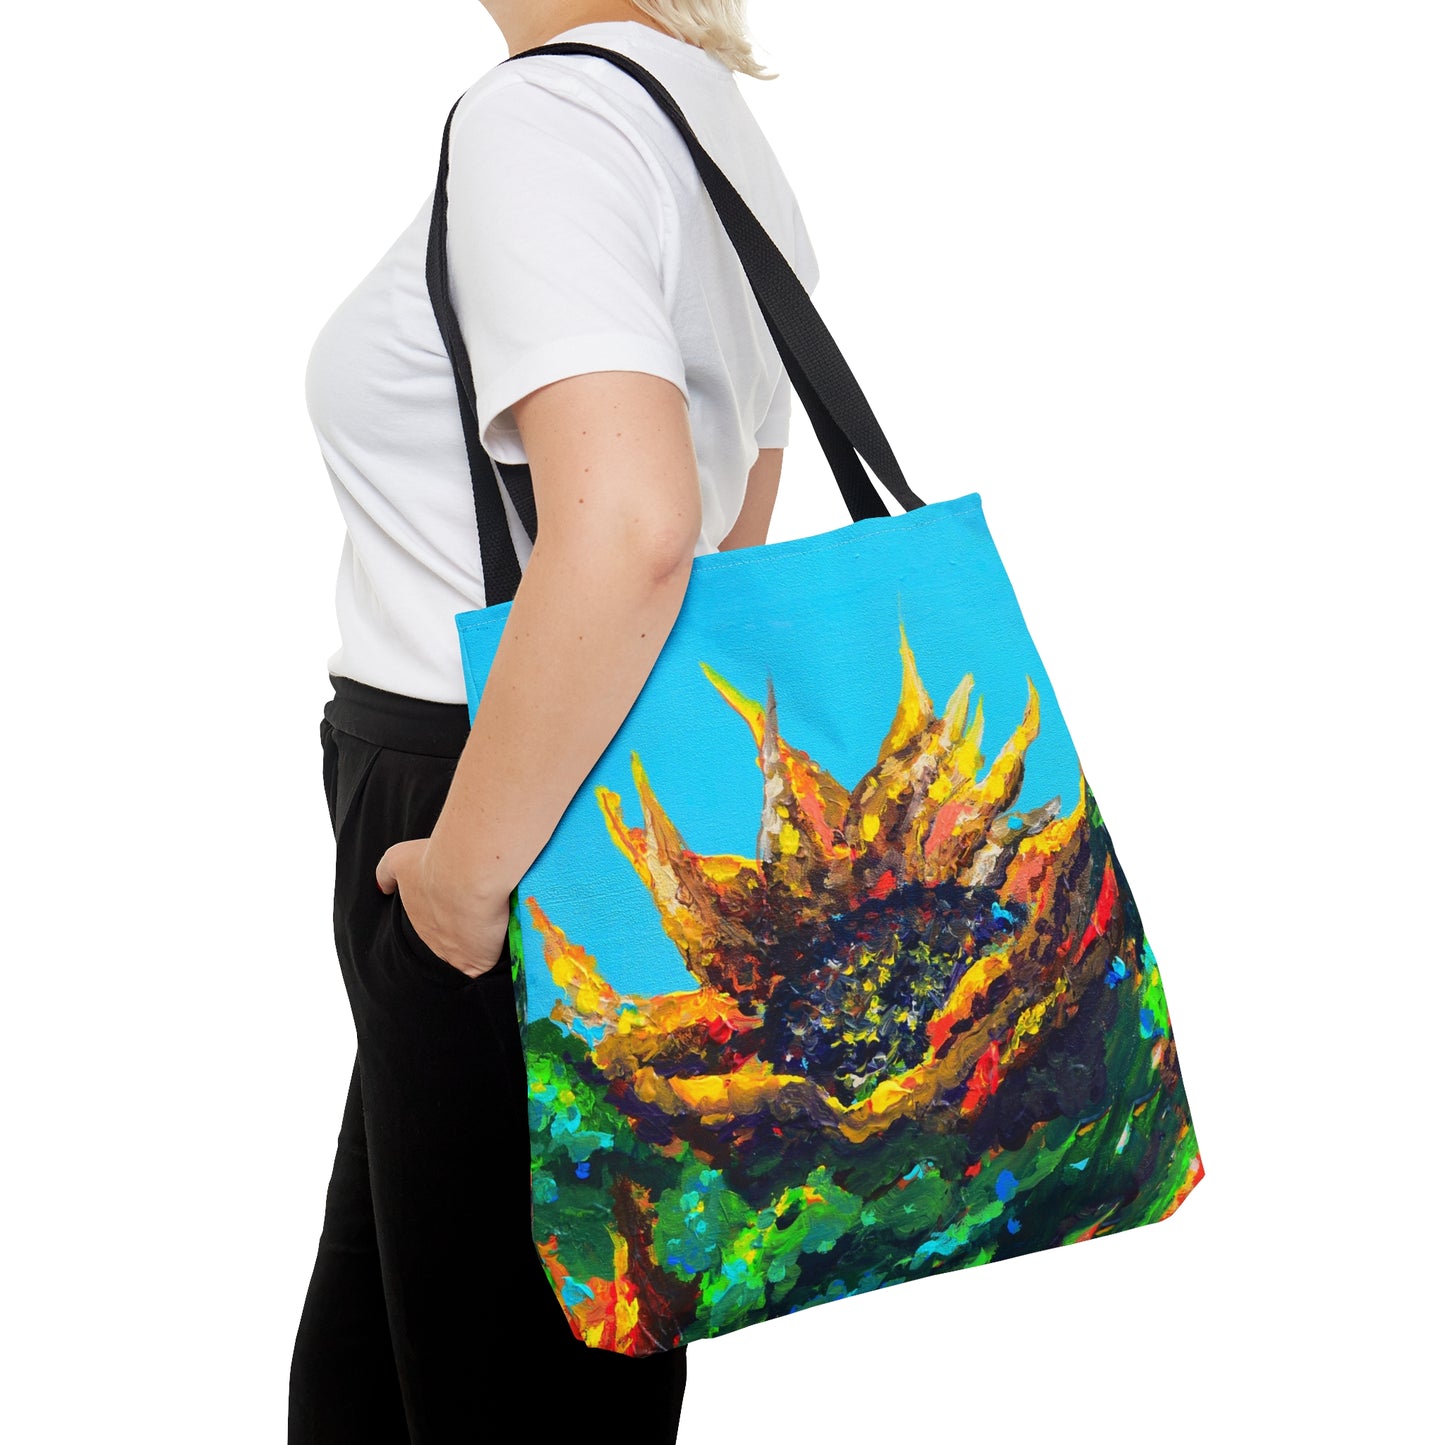 Sunflower Tote Bag, 18 x 17 in